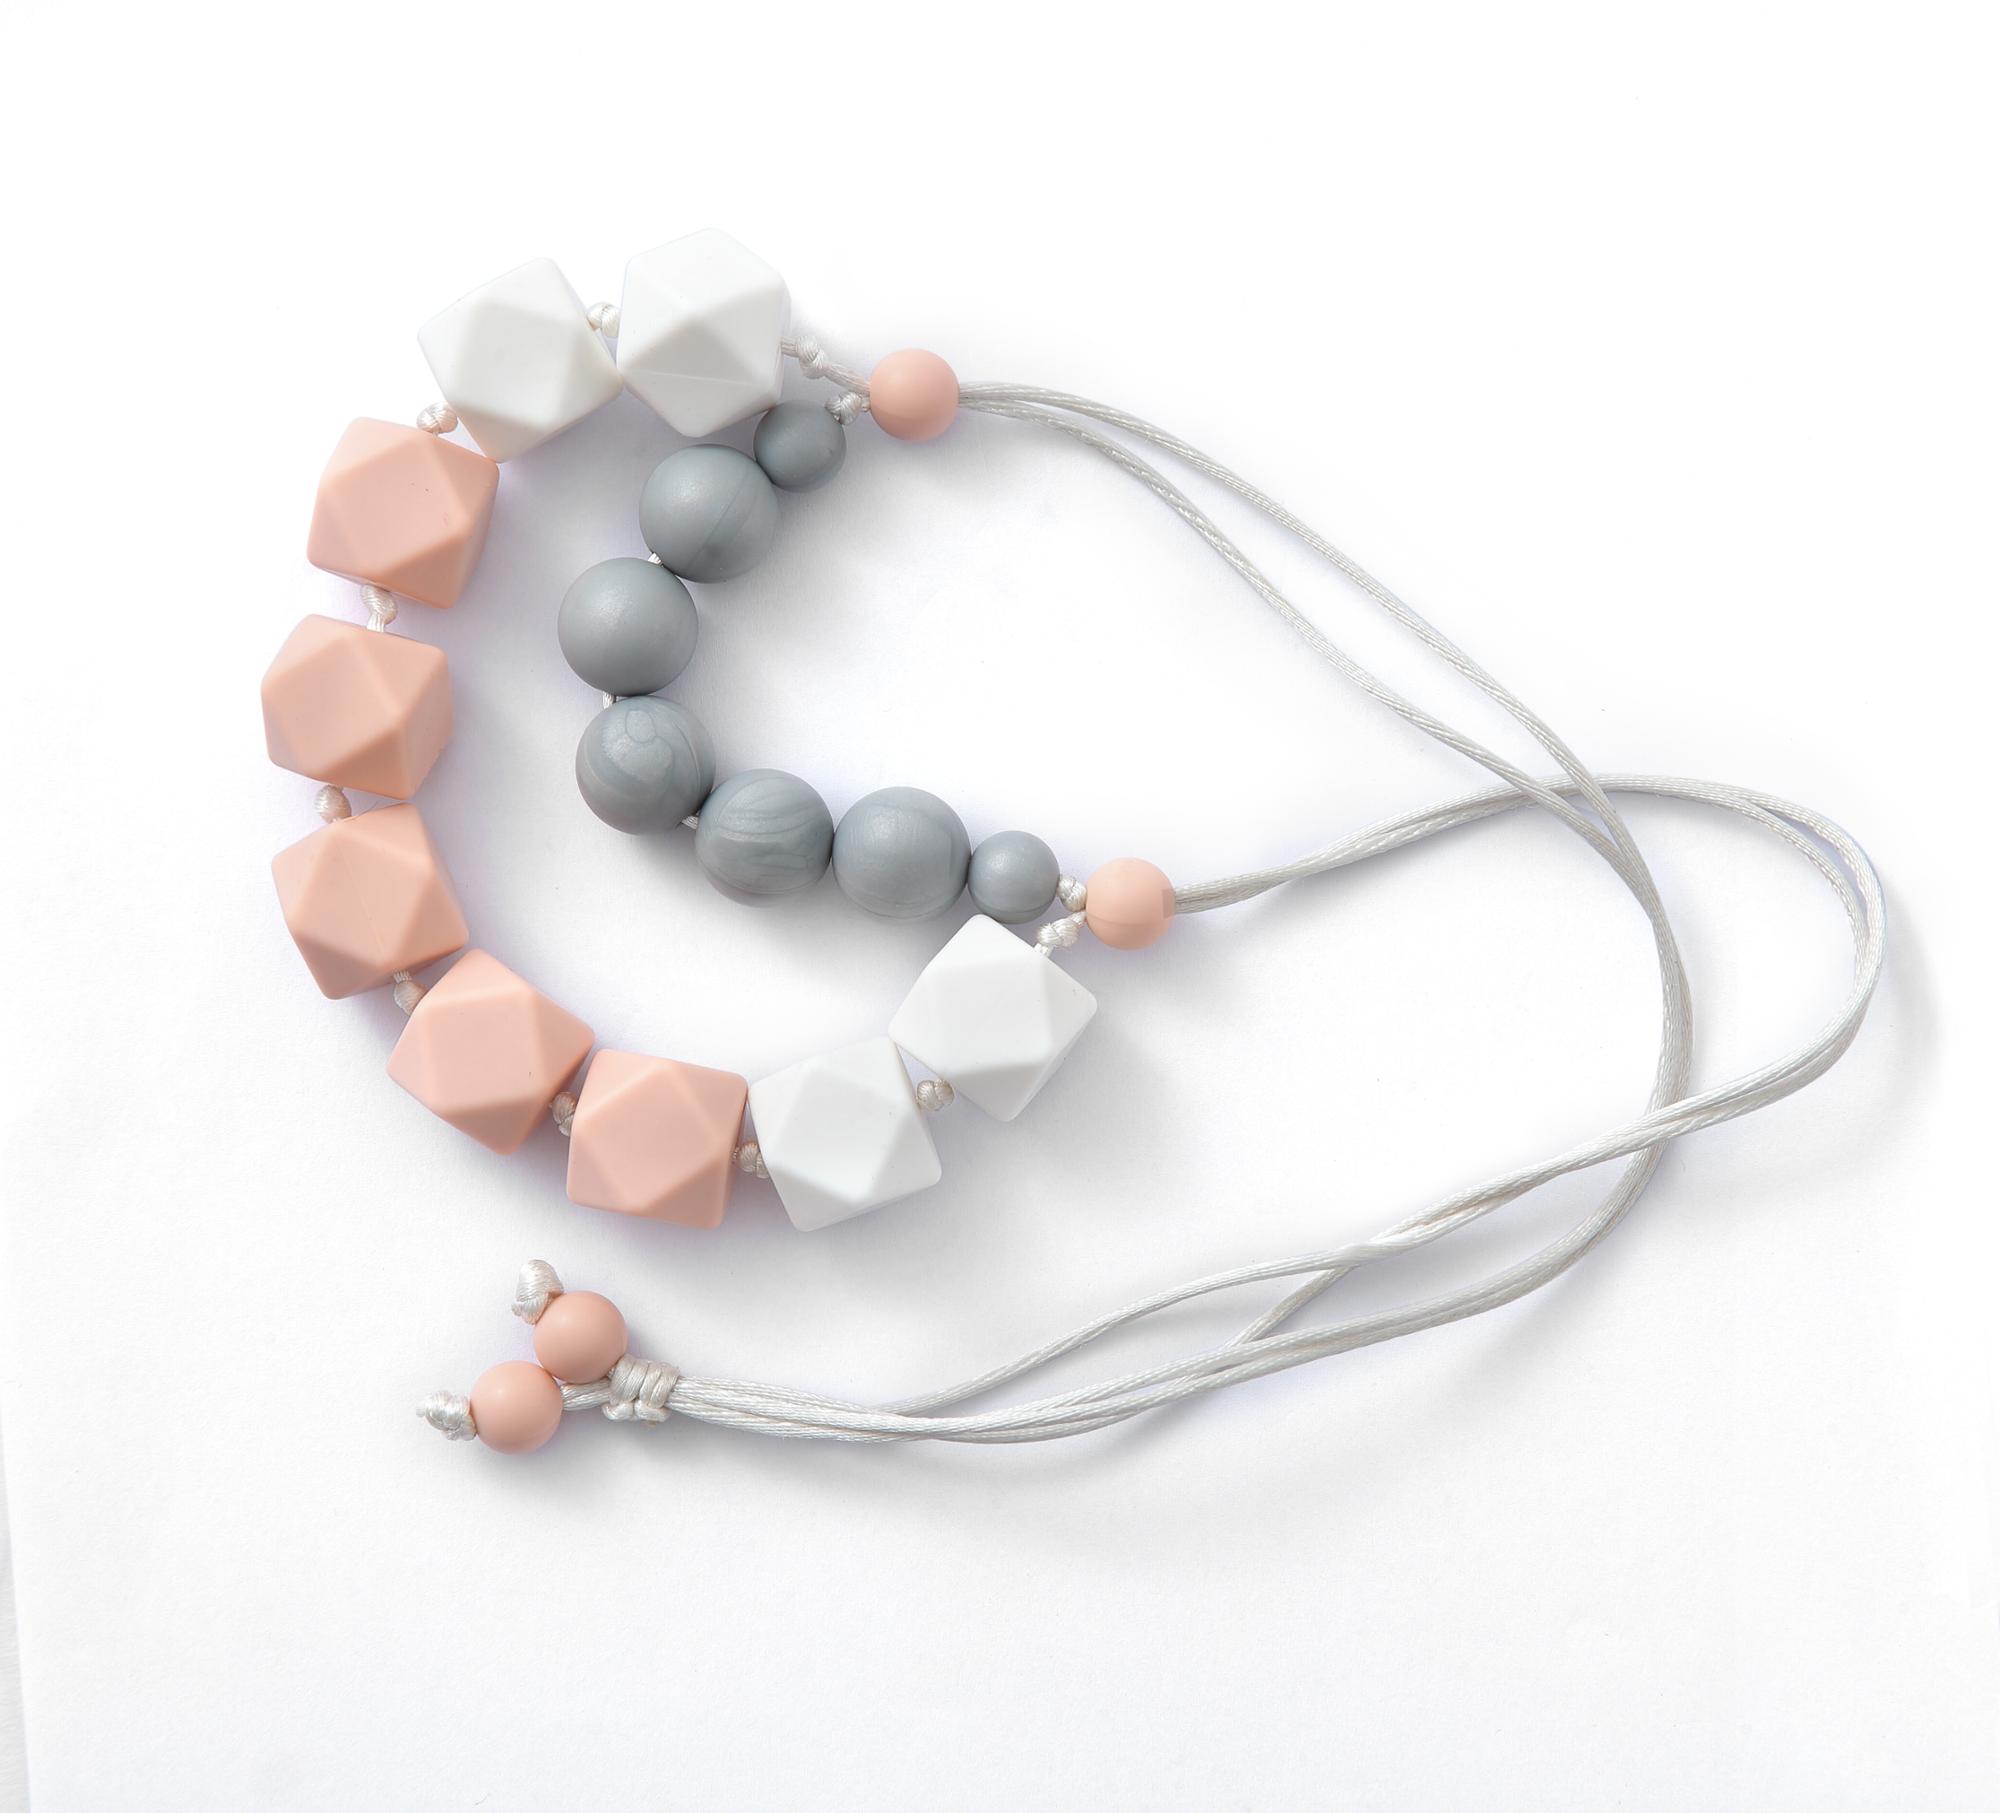  High Quality mother baby teething necklace 9